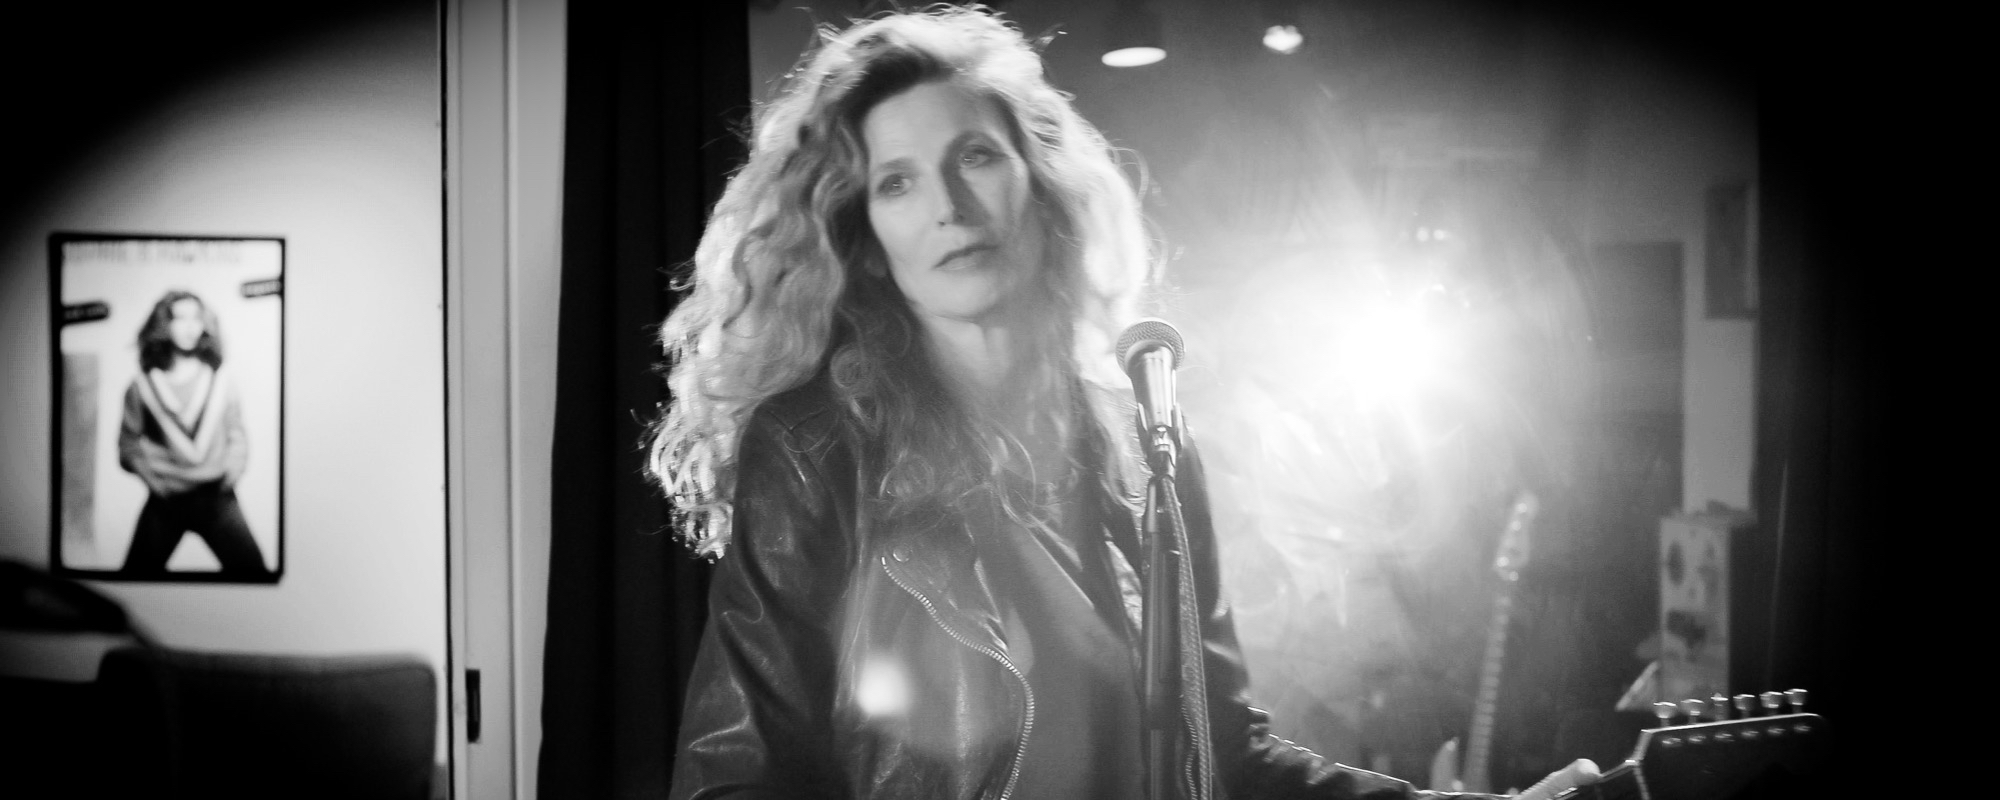 Sophie B. Hawkins is “Better Off Without You”